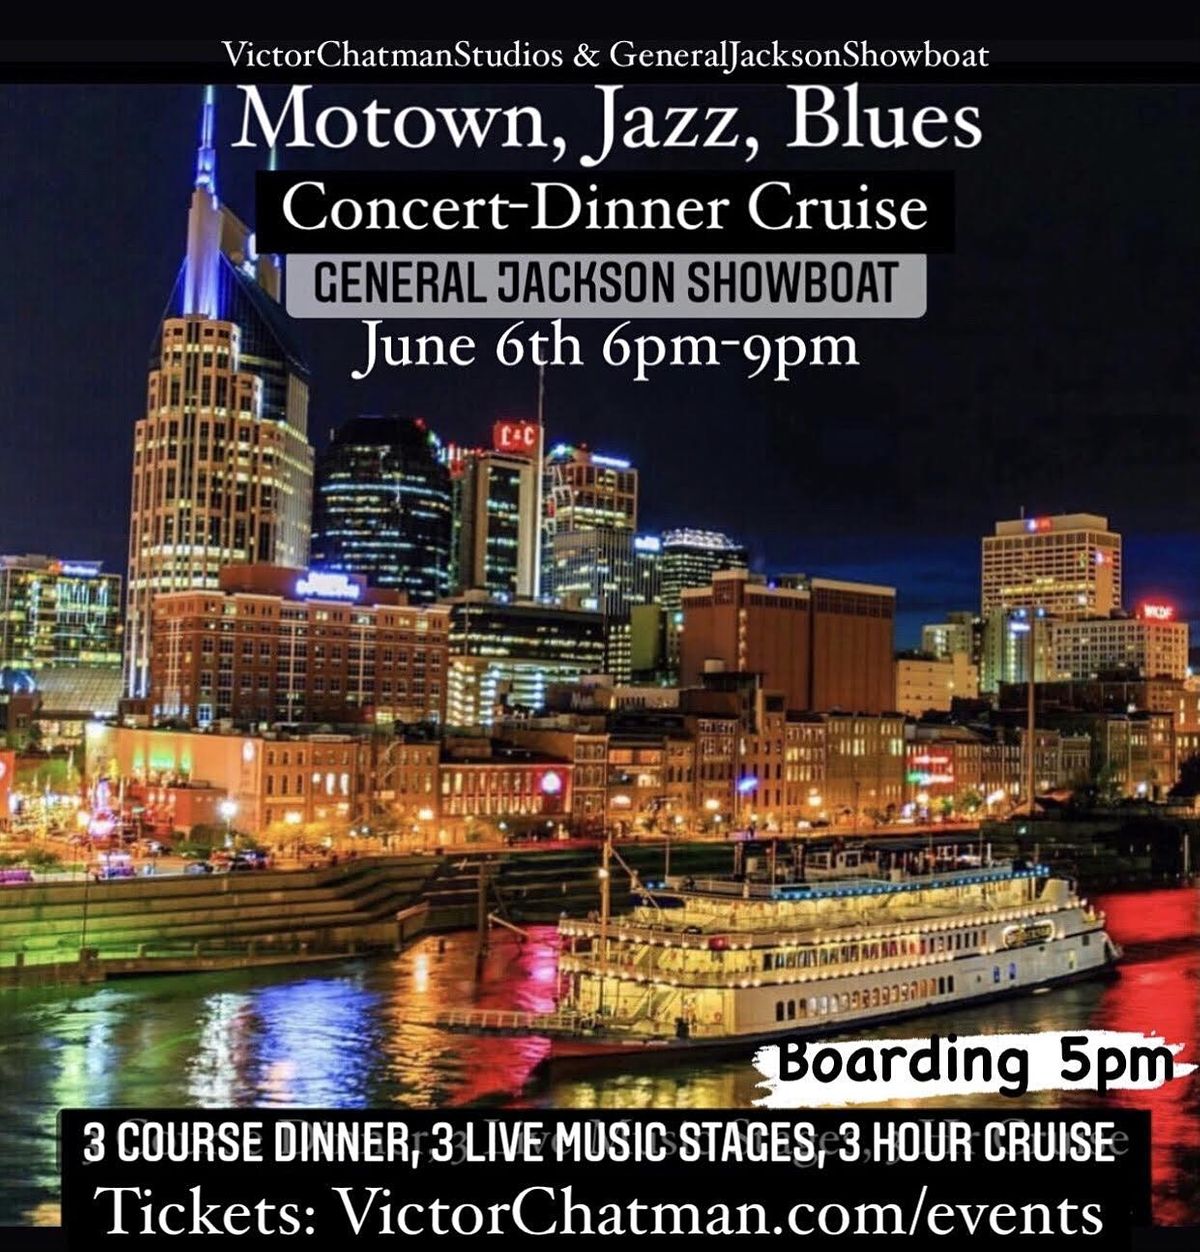 Motown, Jazz, Blues Concert-Dinner Cruise aboard the General Jackson